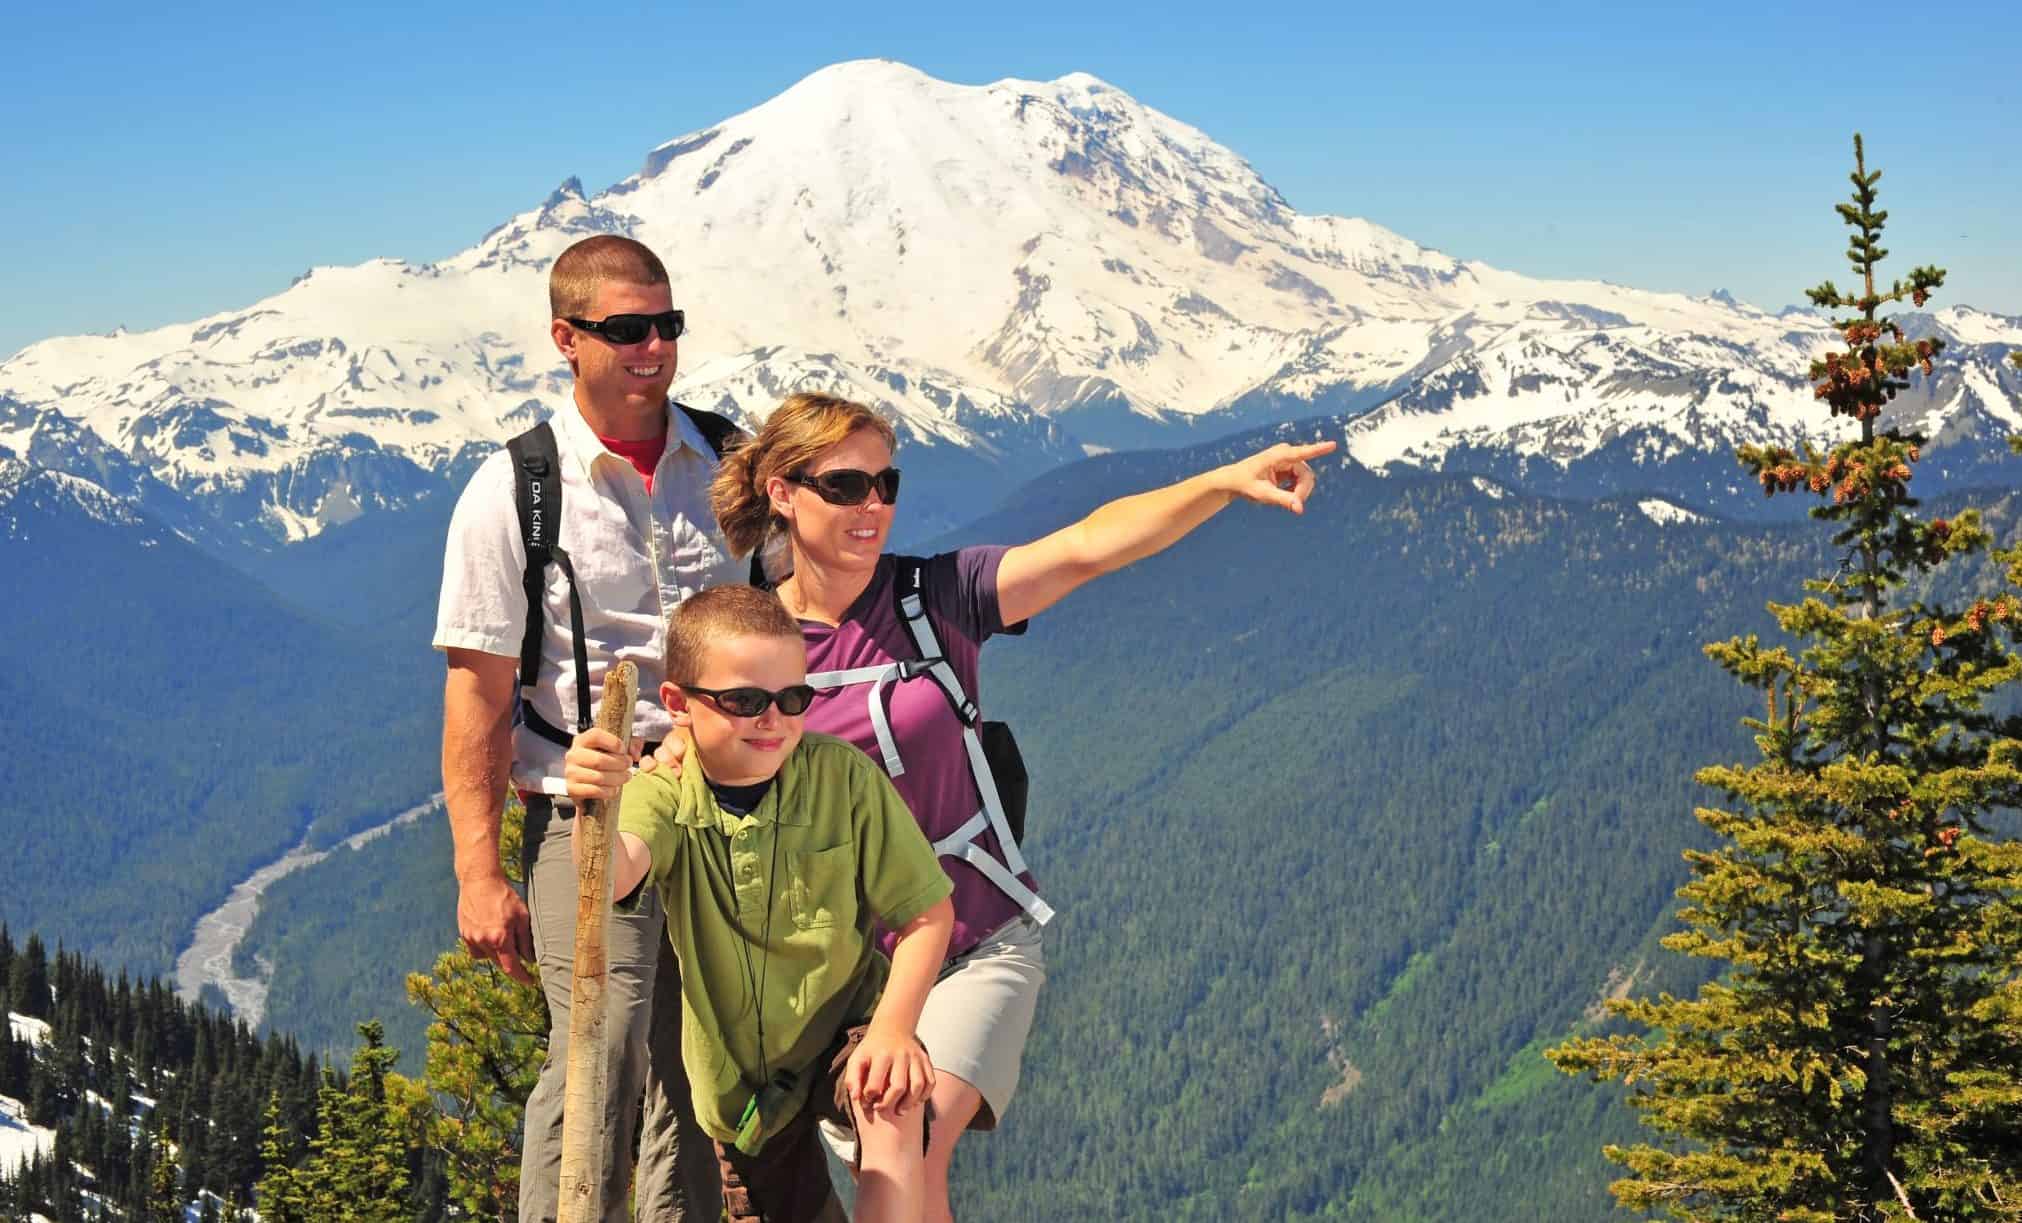 Where can non-hikers go to show off the WOW factor of Rainier?